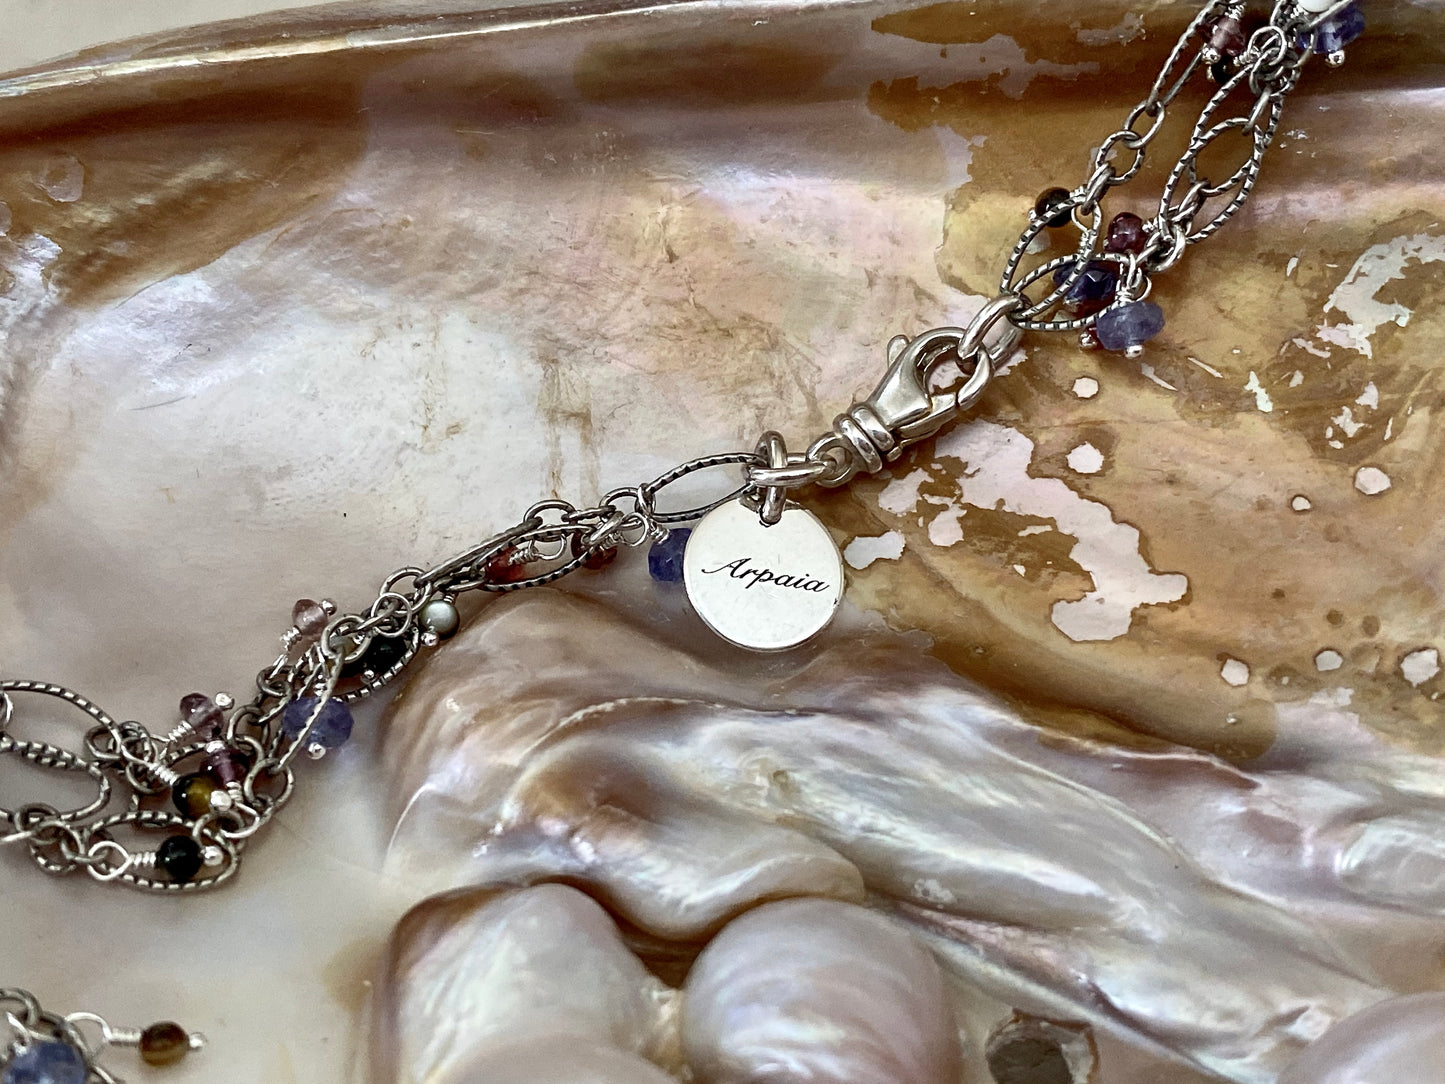 Arpaia Silver Jewelry Tag and Swivel Lobster Clasp